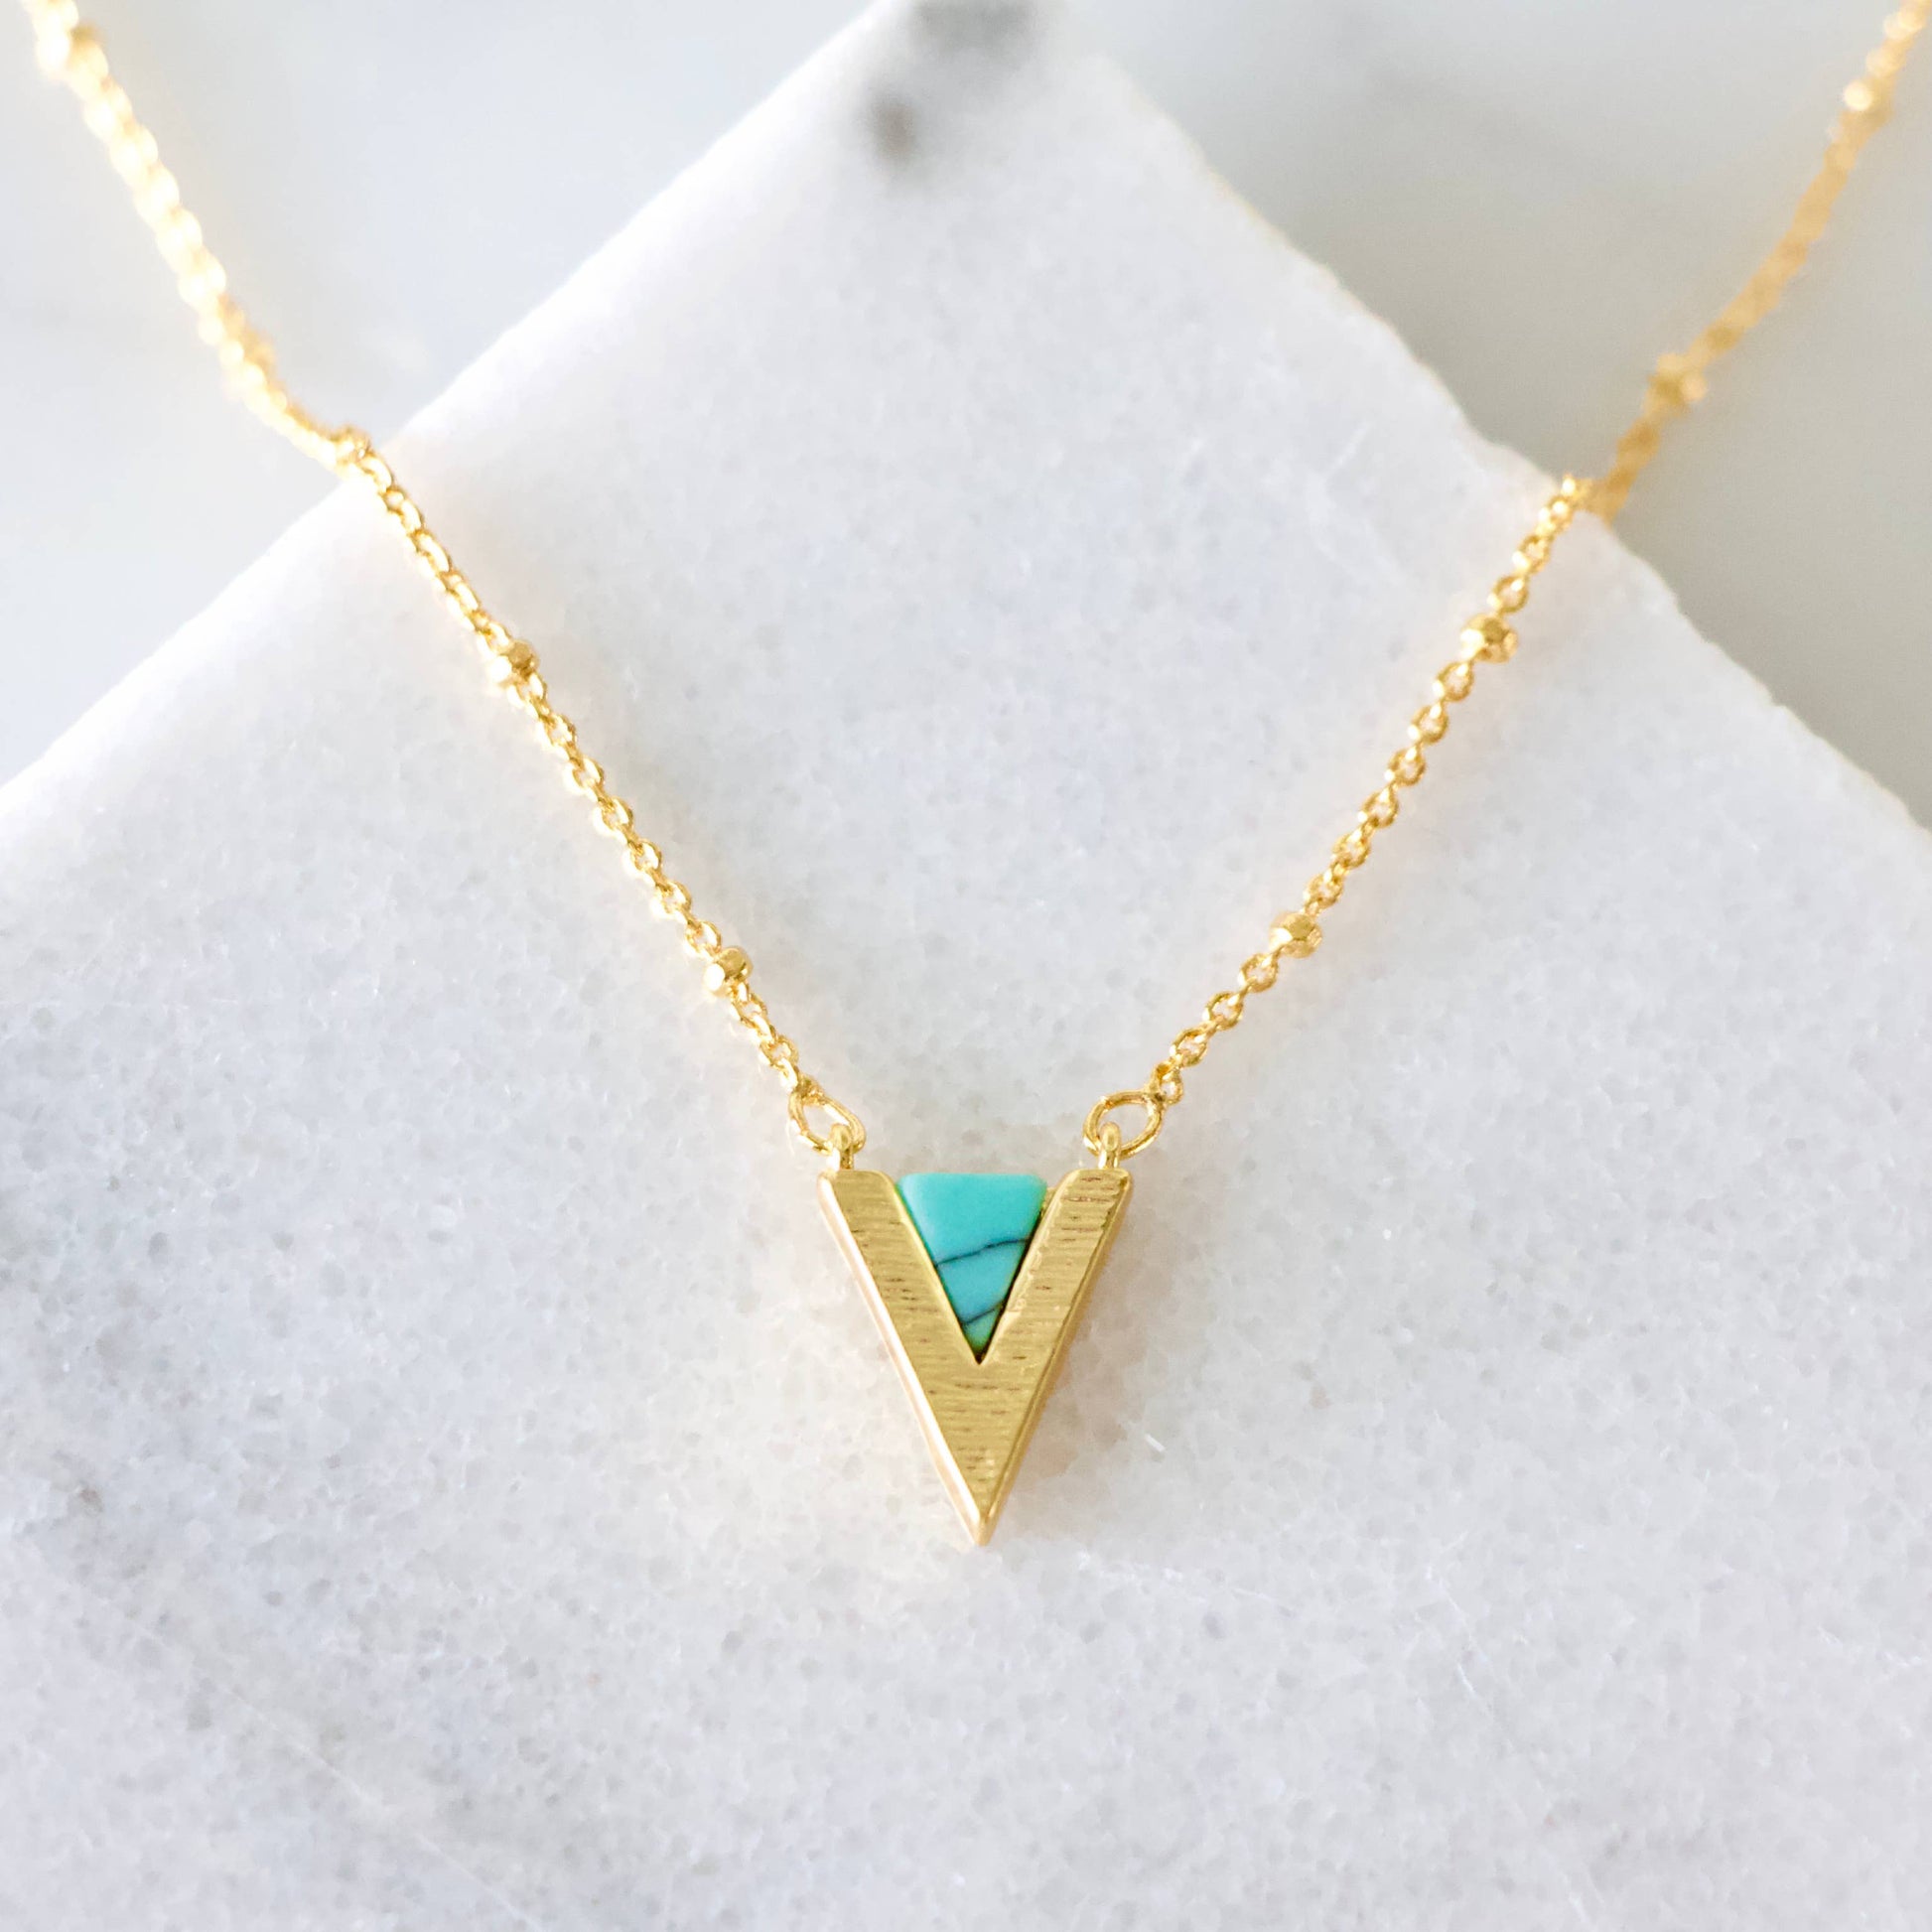 Turquoise Triangle Necklace - Storm and Sky Shoppe